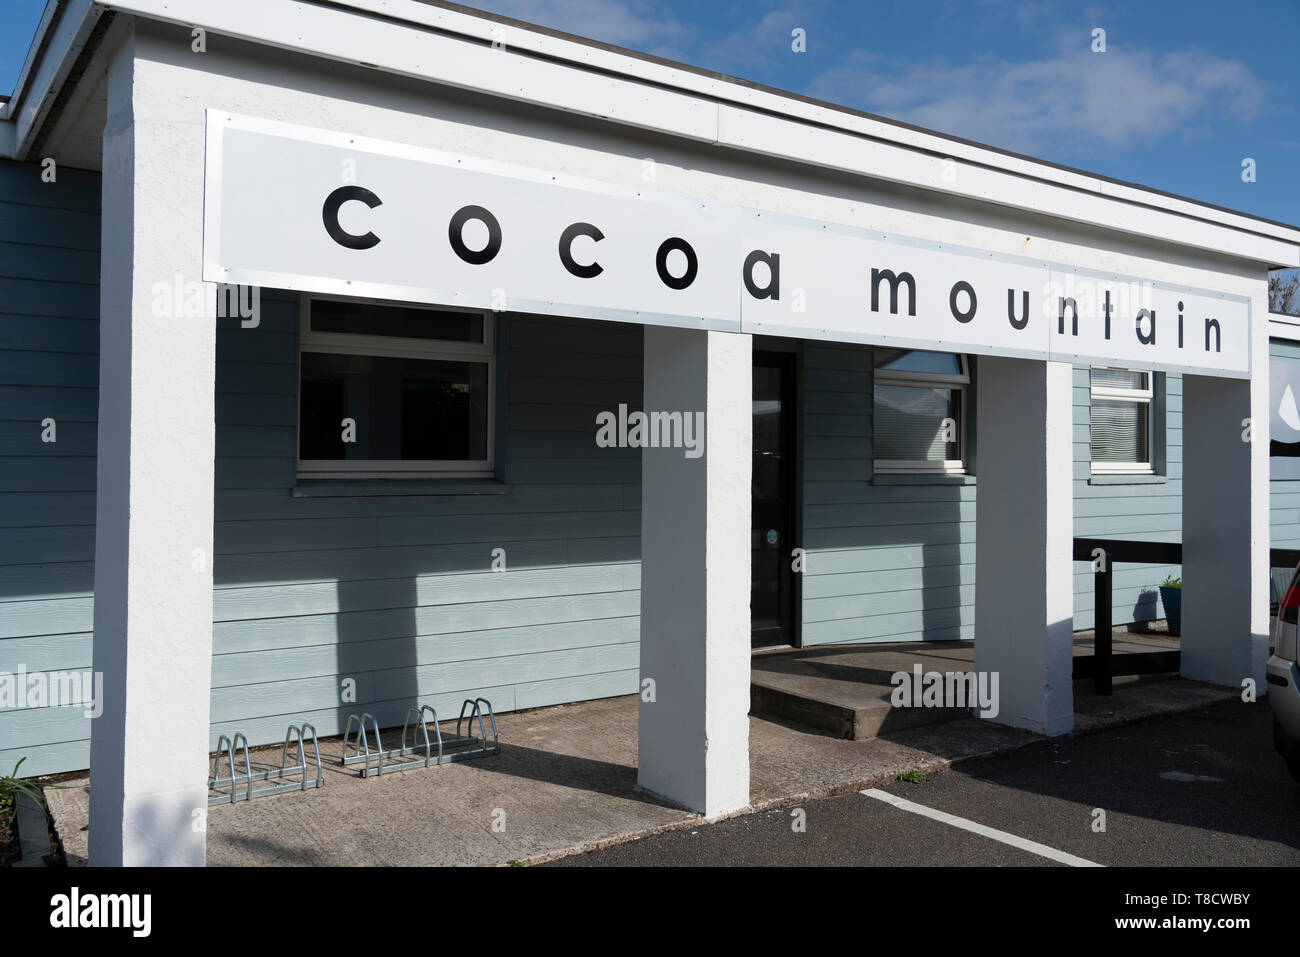 Cocoa Mountain cafe , Balnakeil Craft Village, Durness on the North Coast 500 scenic driving route in northern Scotland, UK Stock Photo